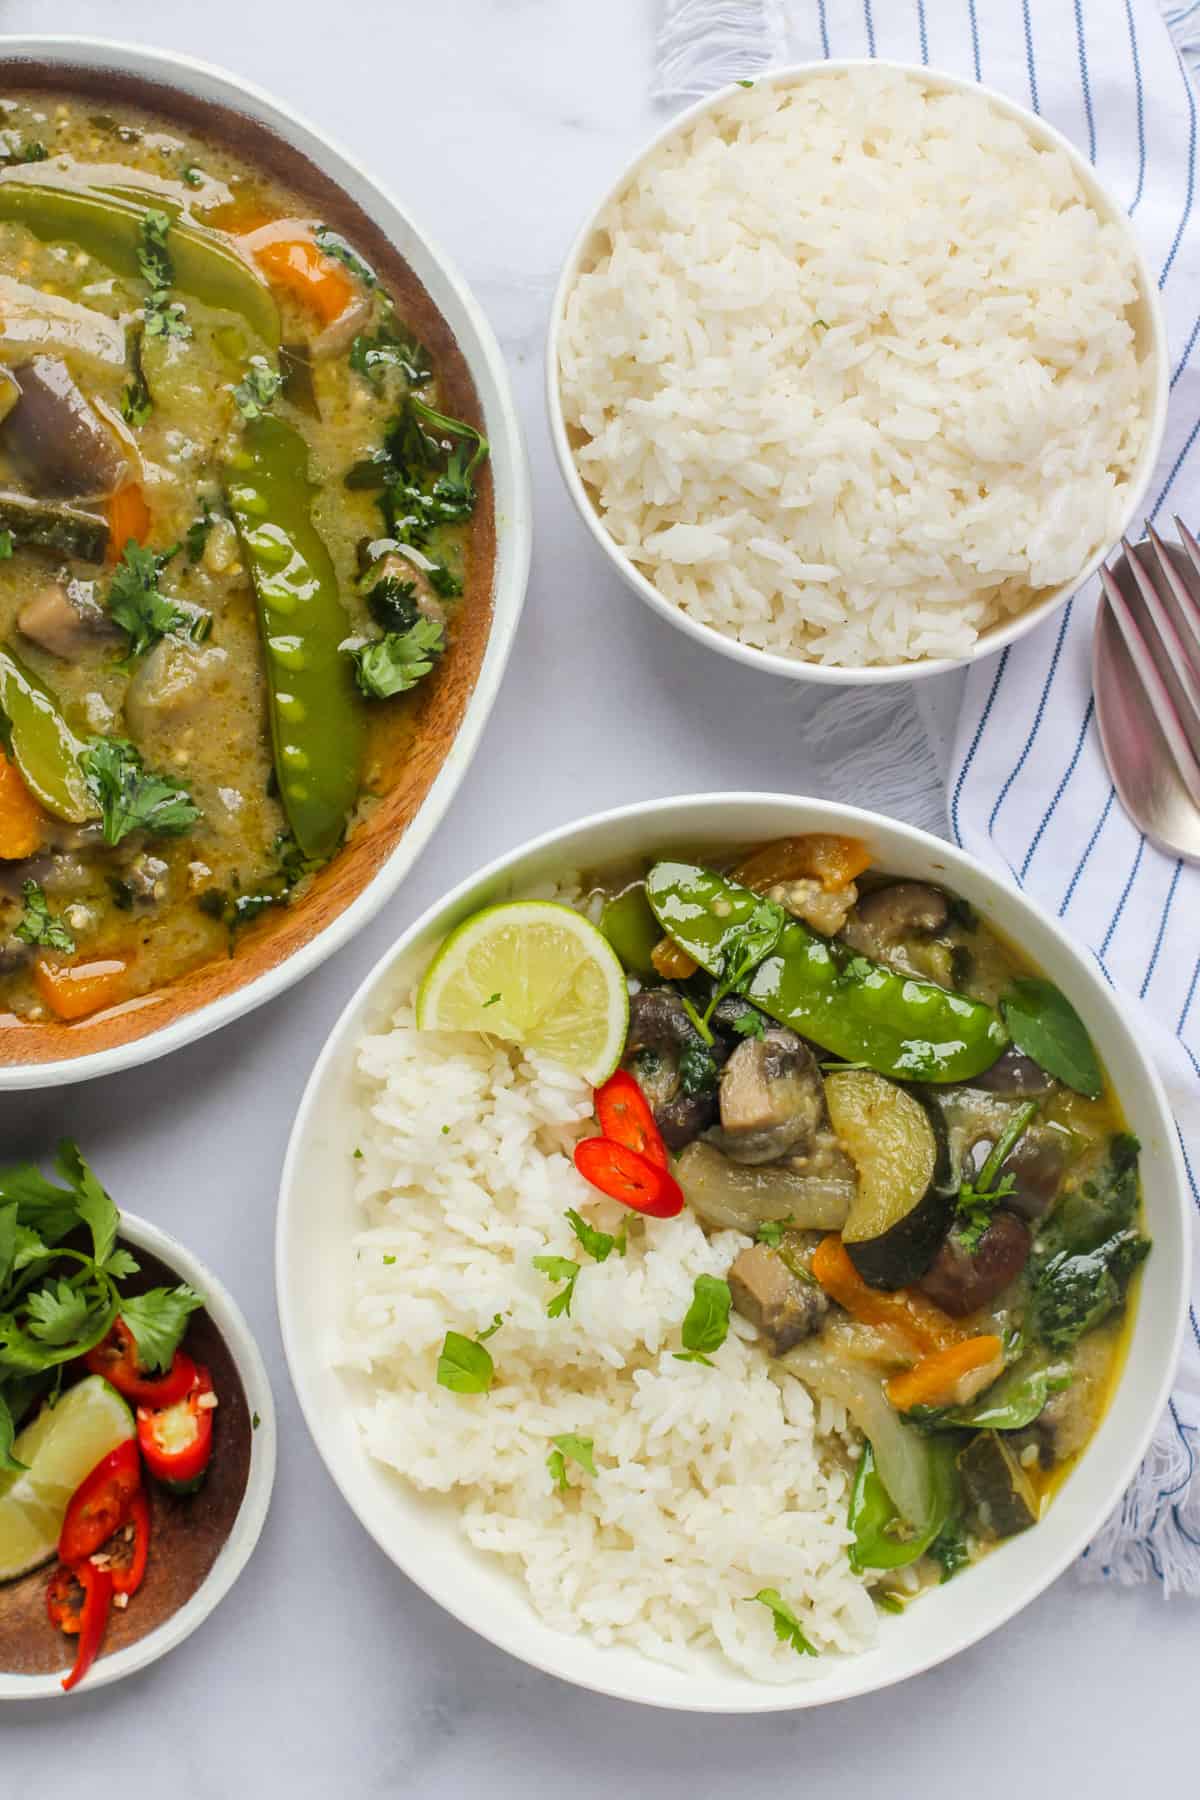 Thai Green Curry With Vegetables - Ministry of Curry